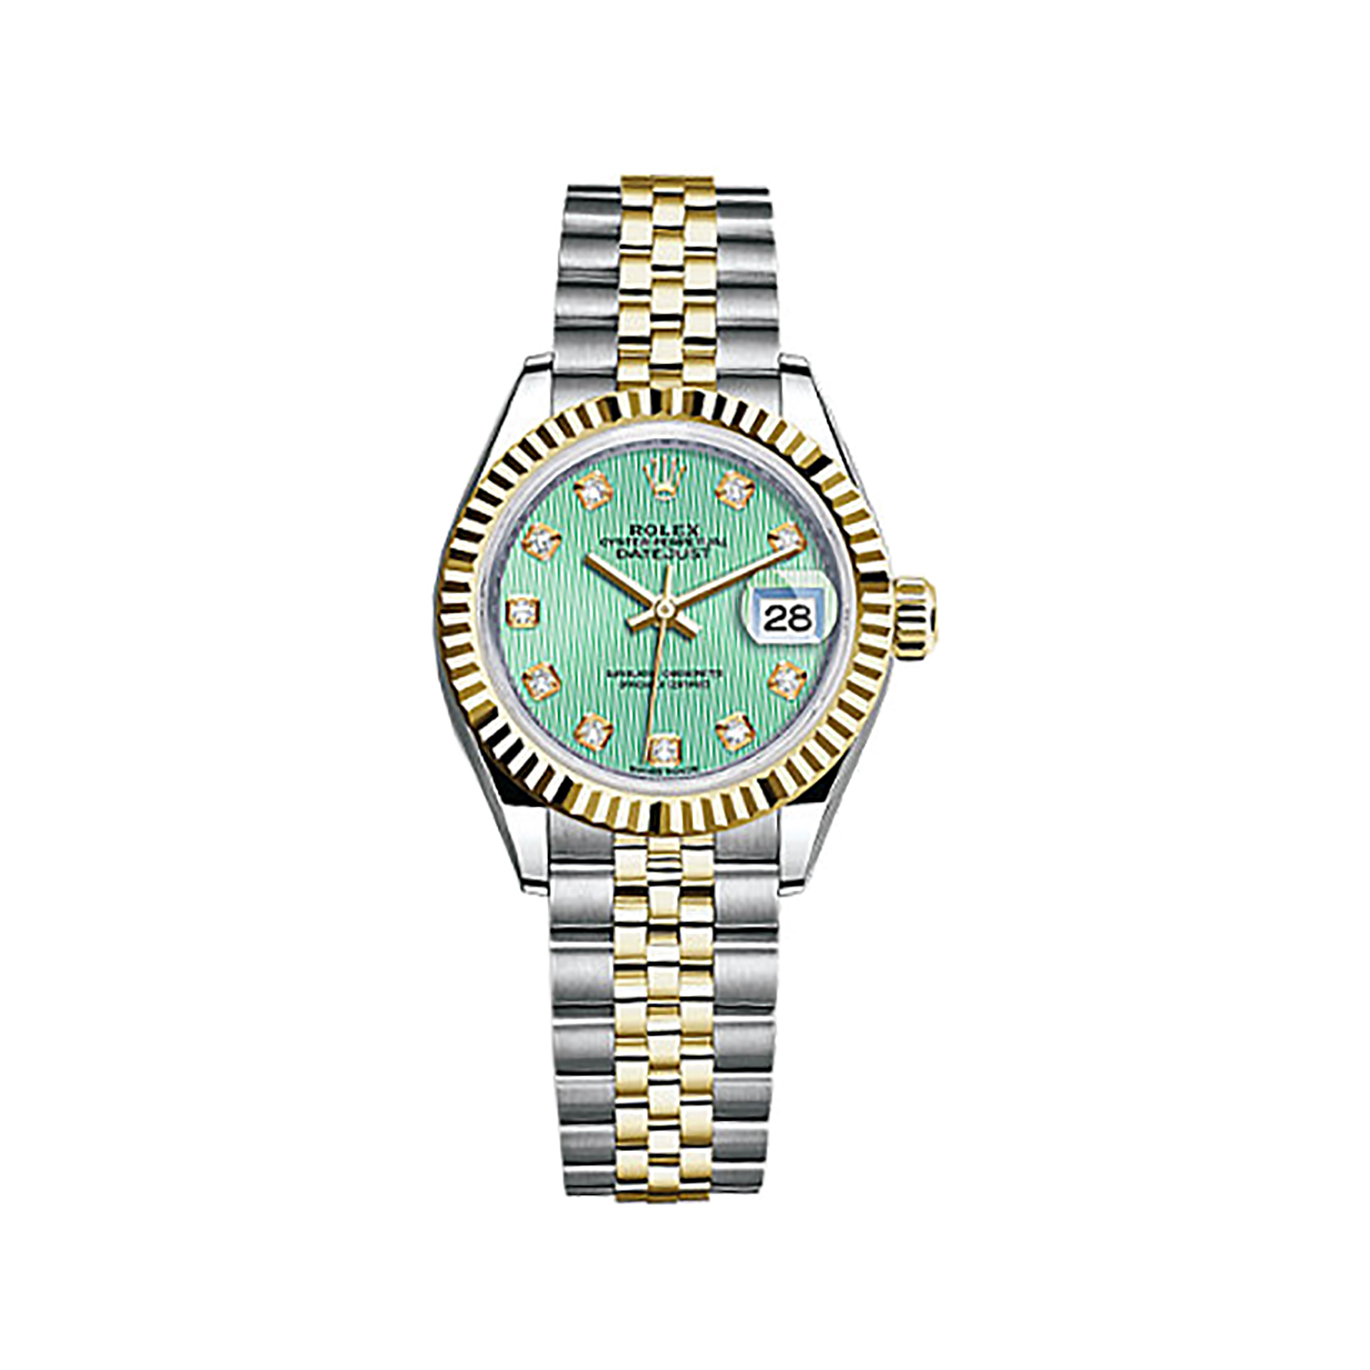 Lady-Datejust 28 279173 Gold & Stainless Steel Watch (Mint Green Set with Diamonds)